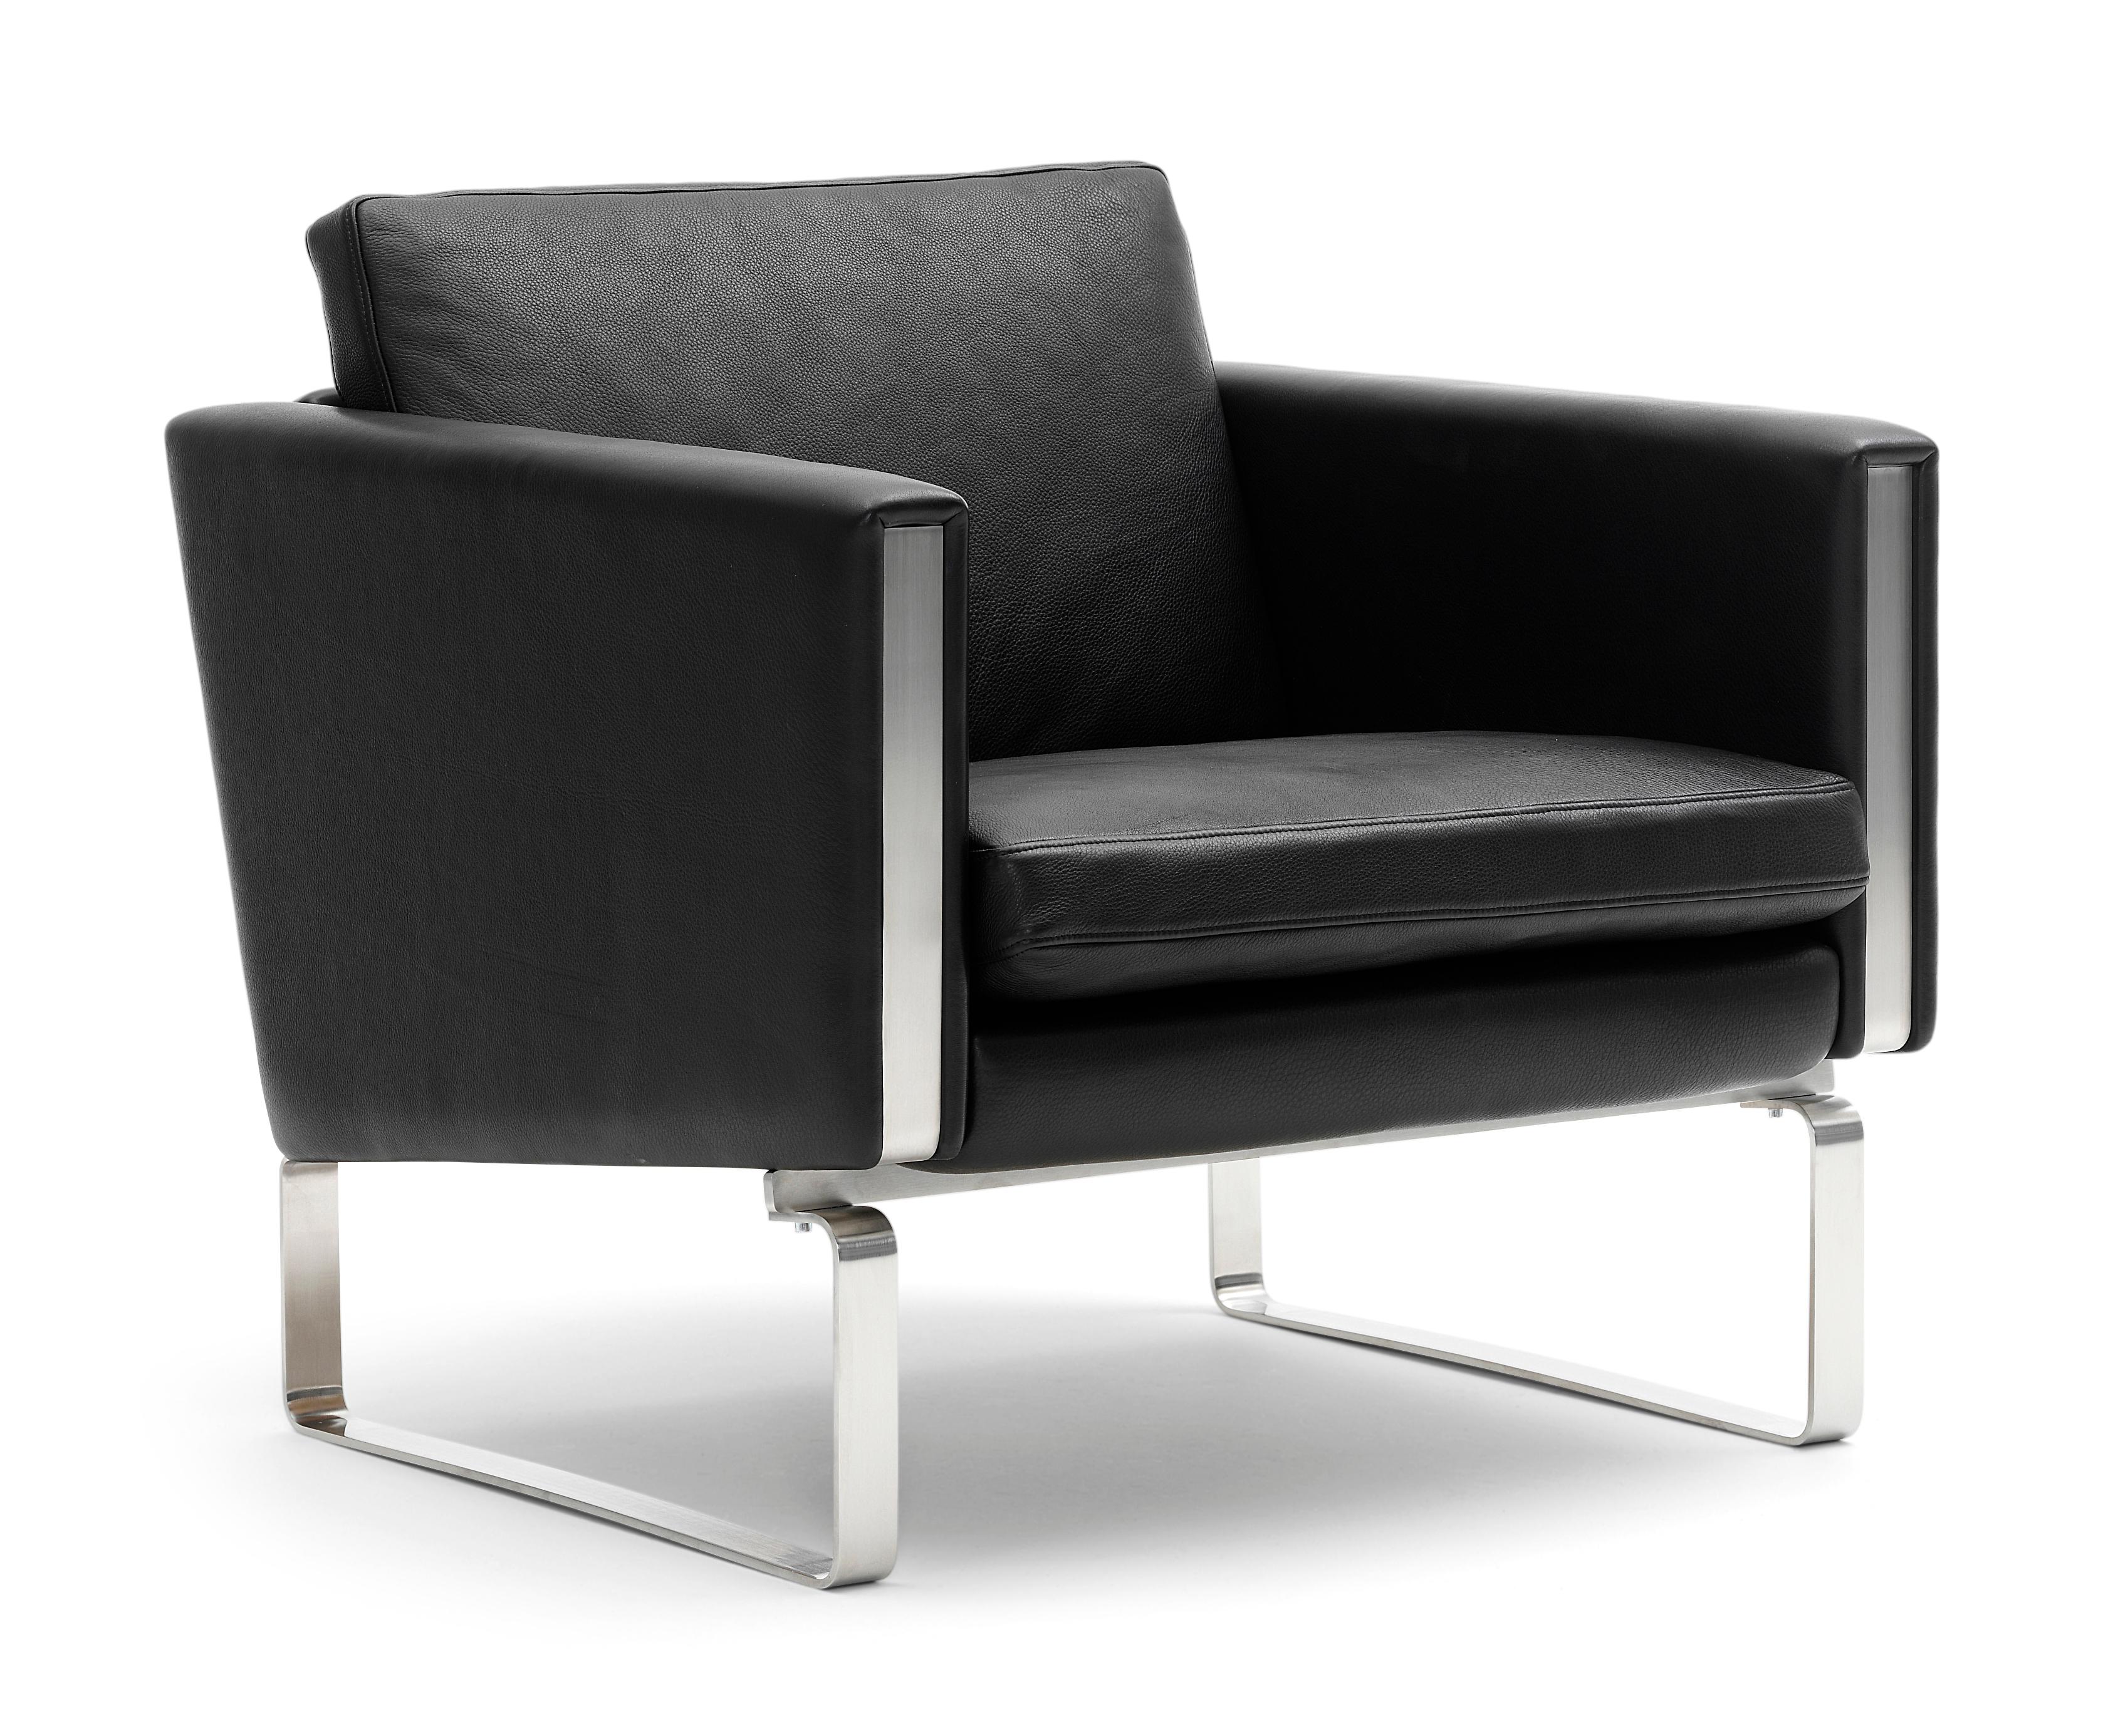 Black (Thor 301) CH101 Chair in Stainless Steel Frame with Leather Seat by Hans J. Wegner 2